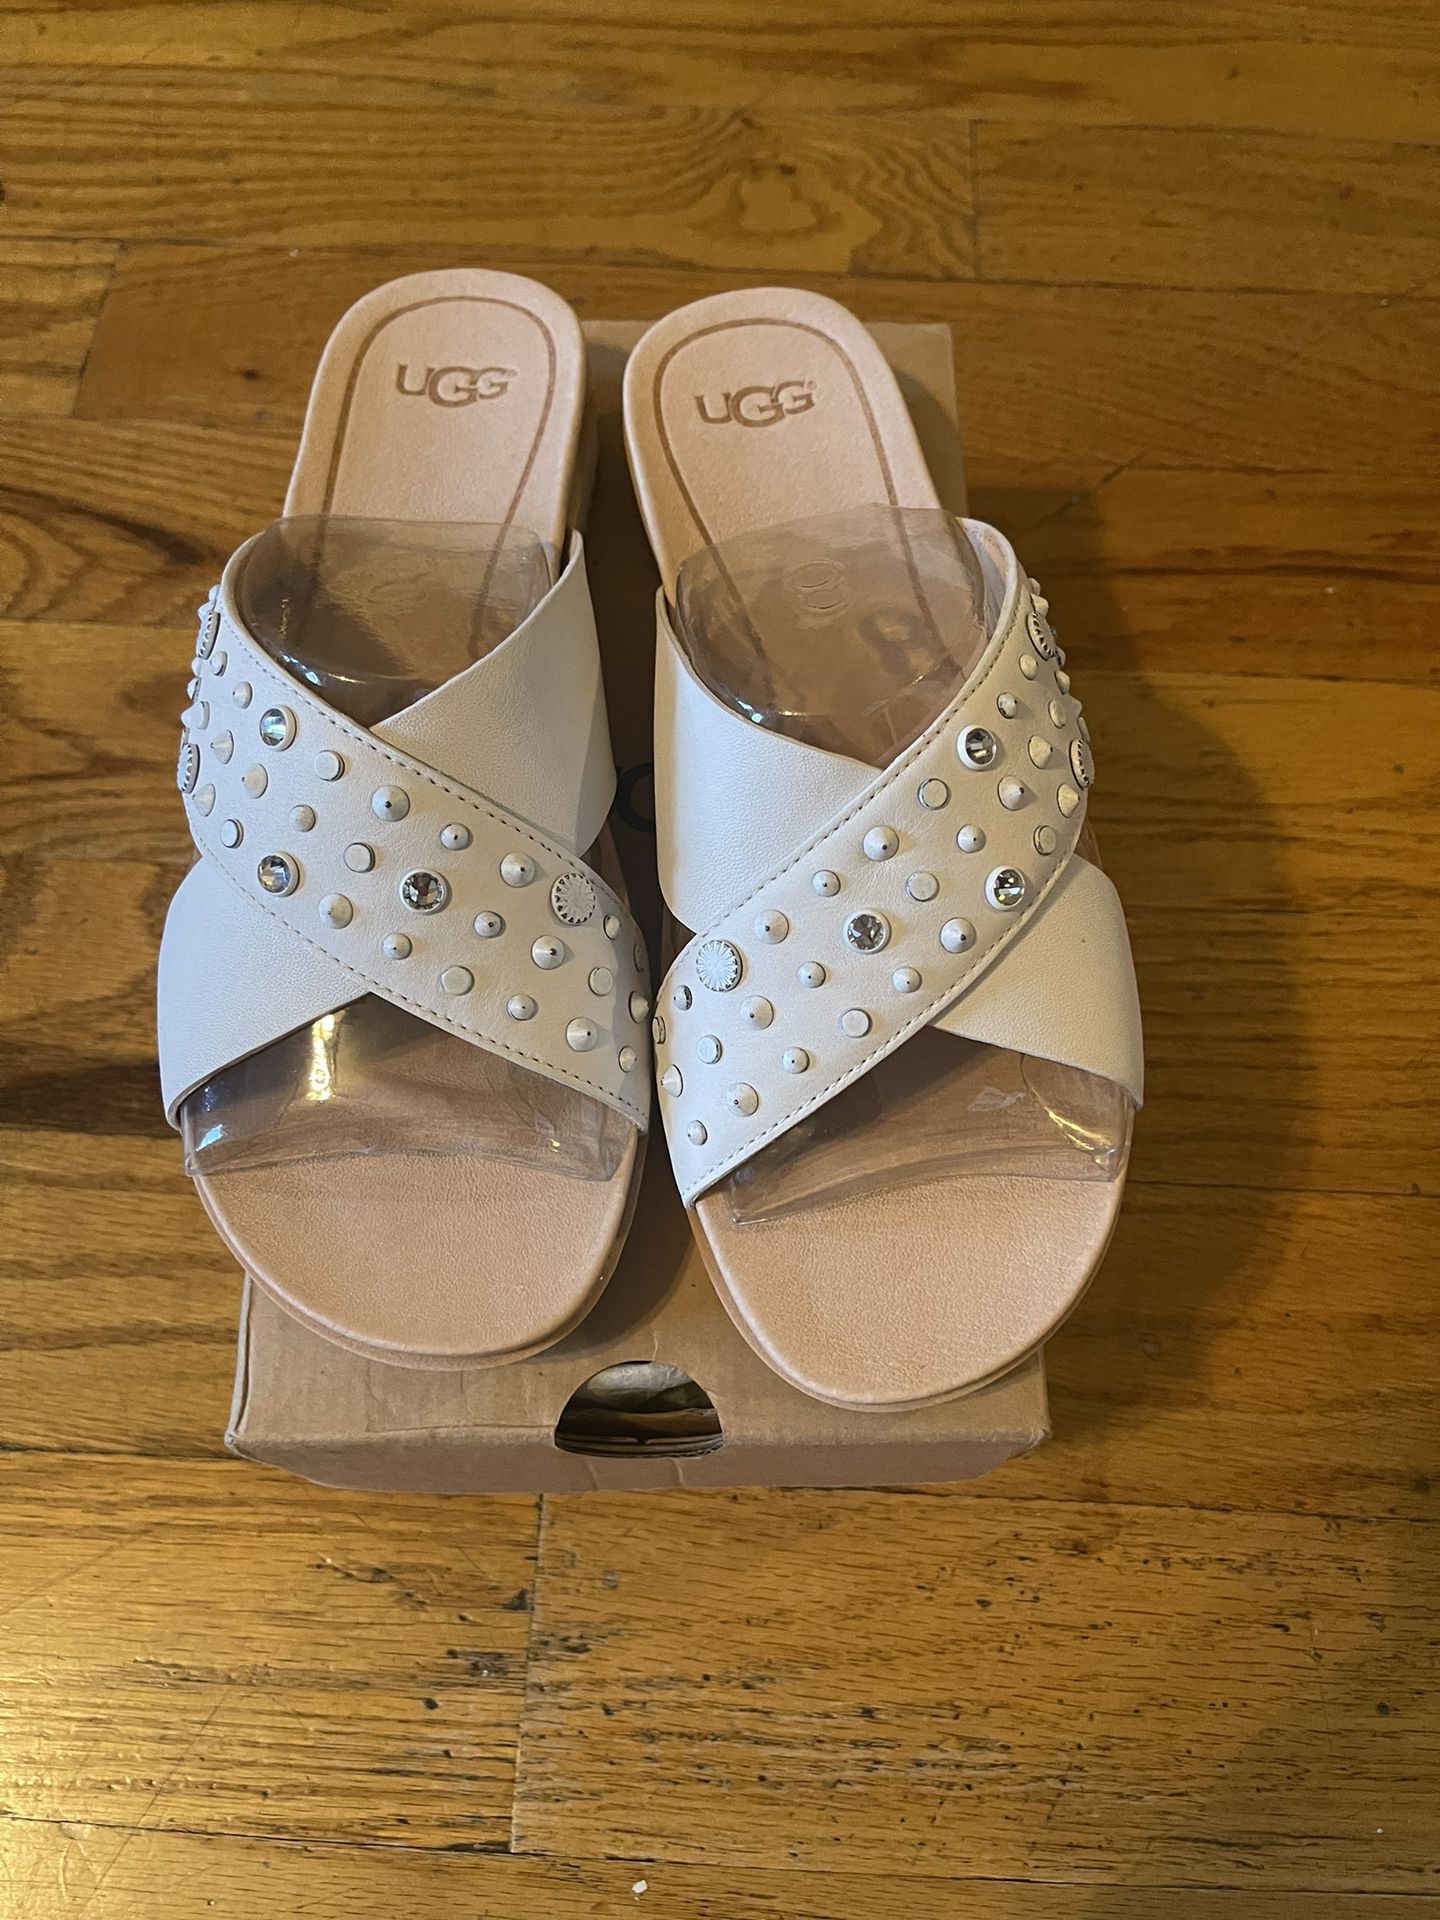 New Ugg Sandals Size 8